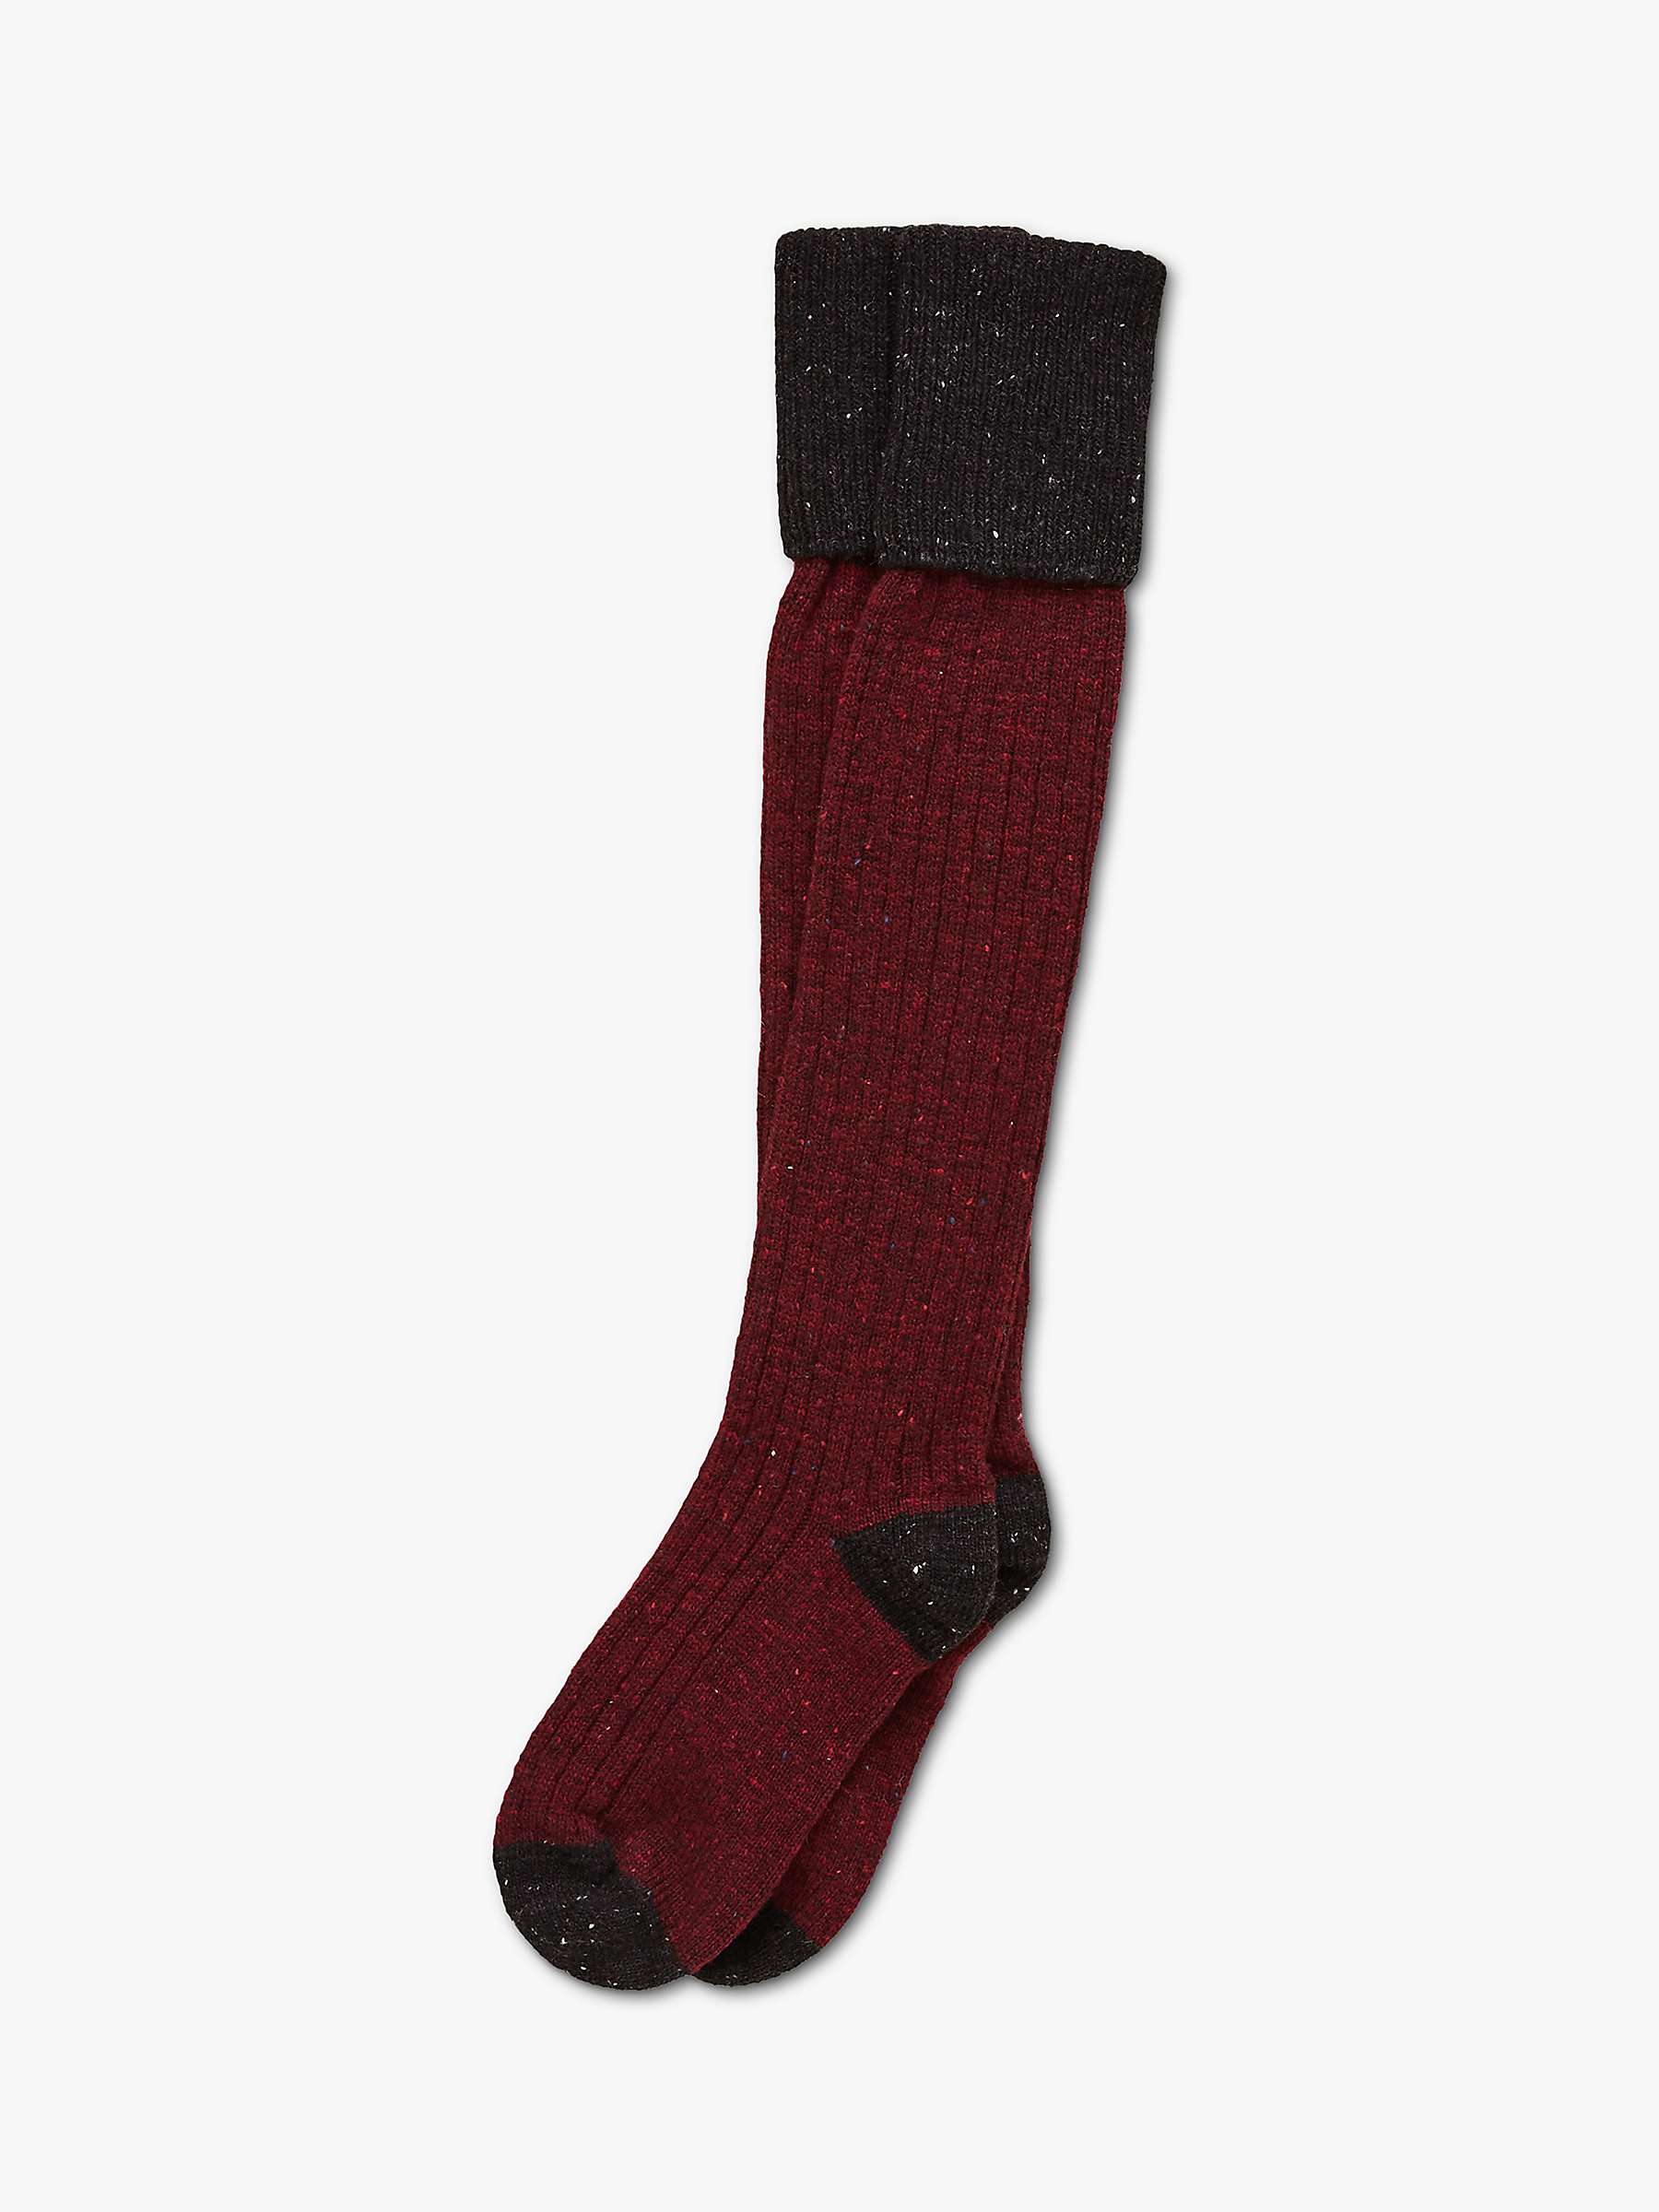 Buy Celtic & Co. Wool Cashmere and Silk Knee High Ribbed Socks, Claret Online at johnlewis.com